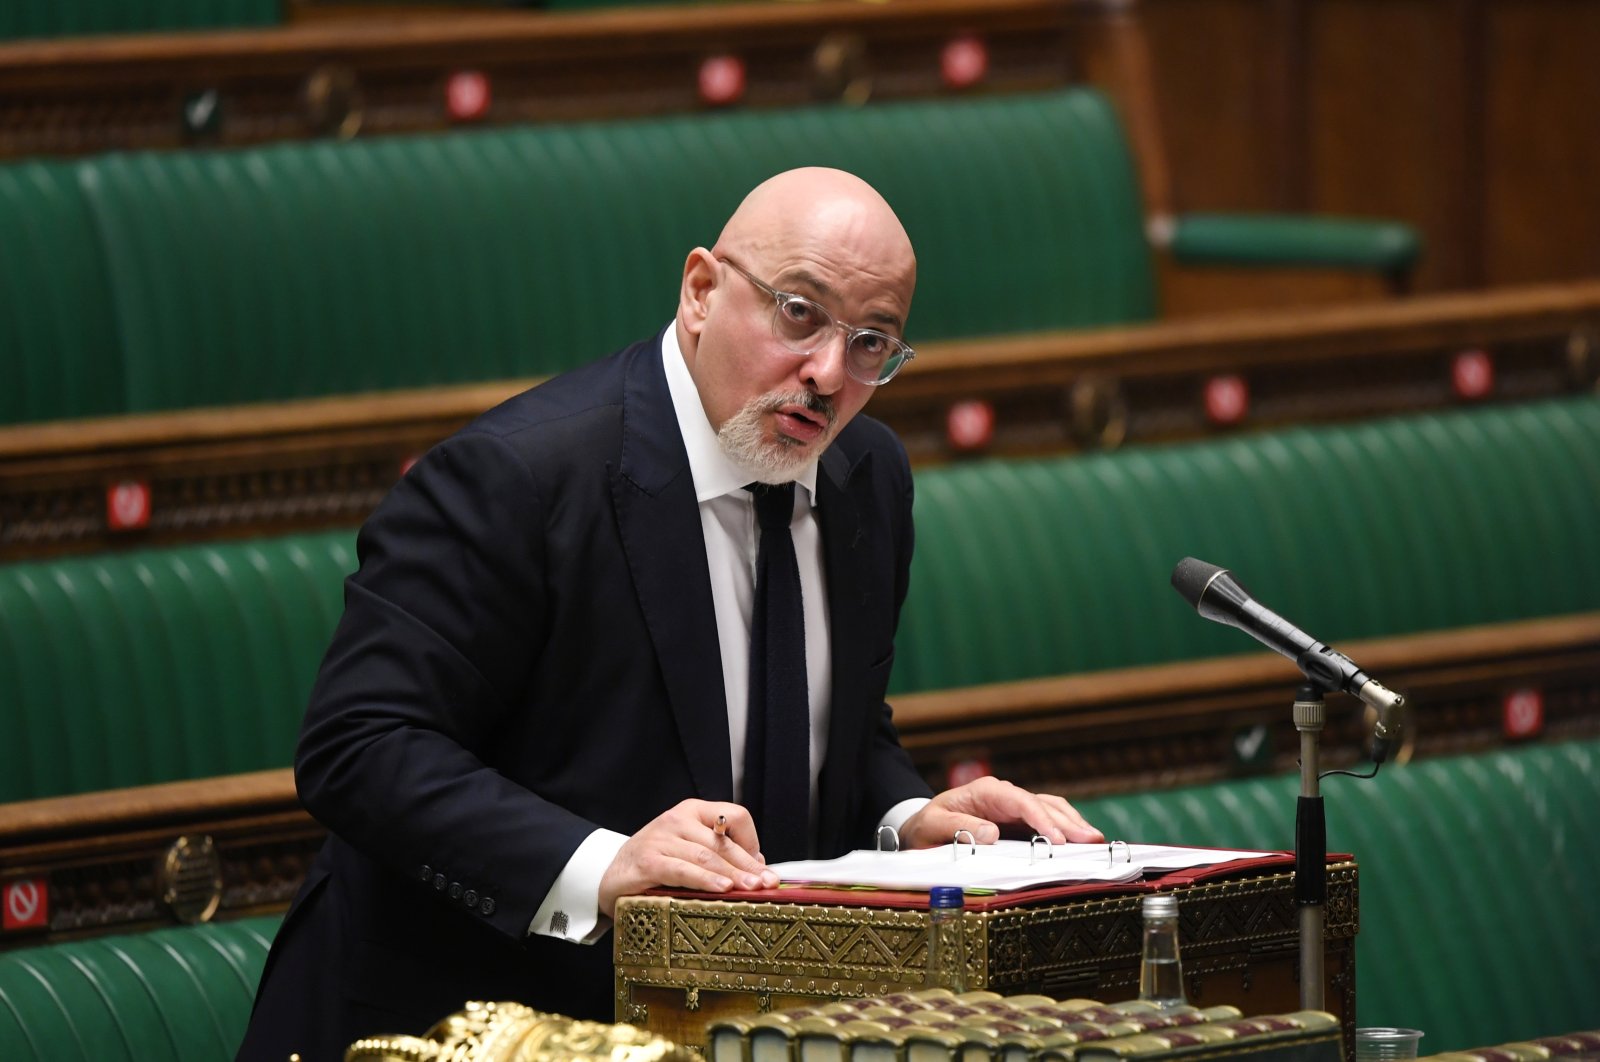 British Vaccine Deployment Minister Nadhim Zahawi speaks at the House of Commons in London, Britain, Feb. 4, 2021. (UK Parliament Handout via REUTERS)